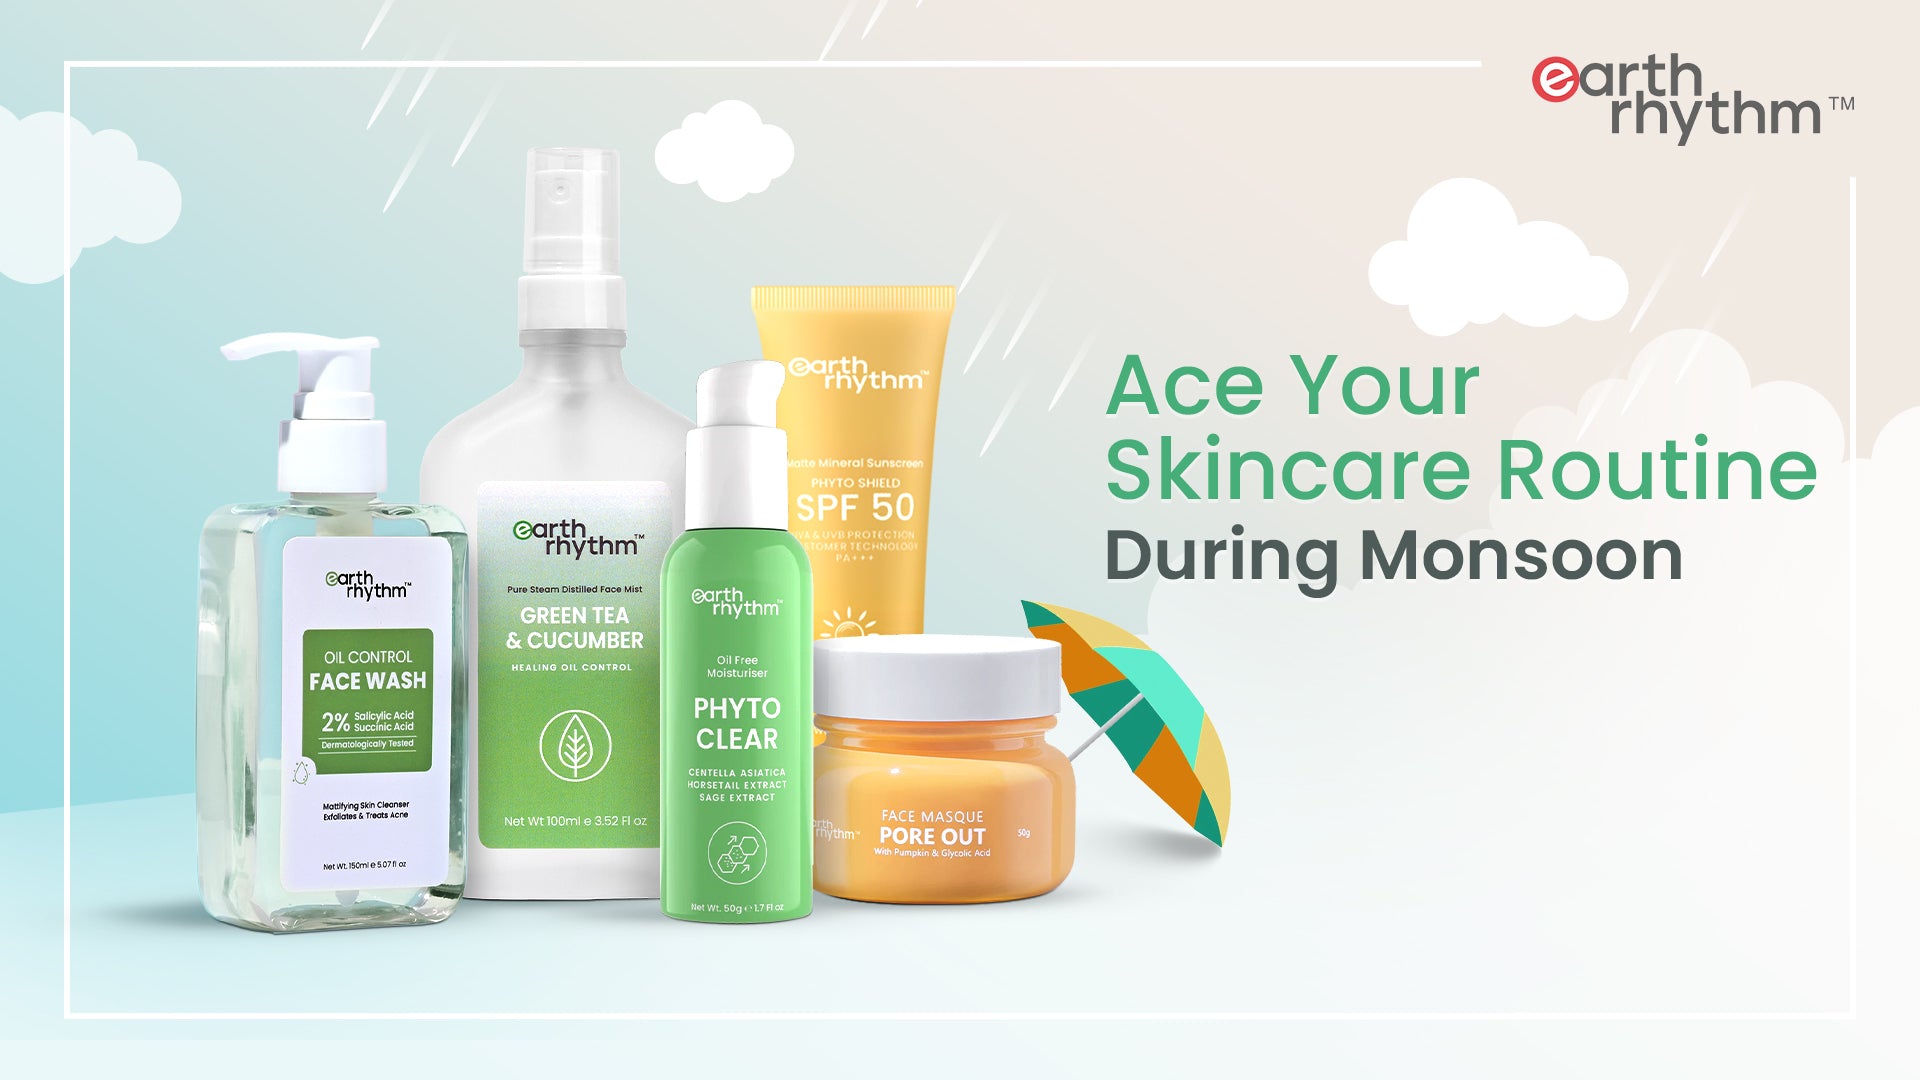 Ace Your Skincare Routine During Monsoon